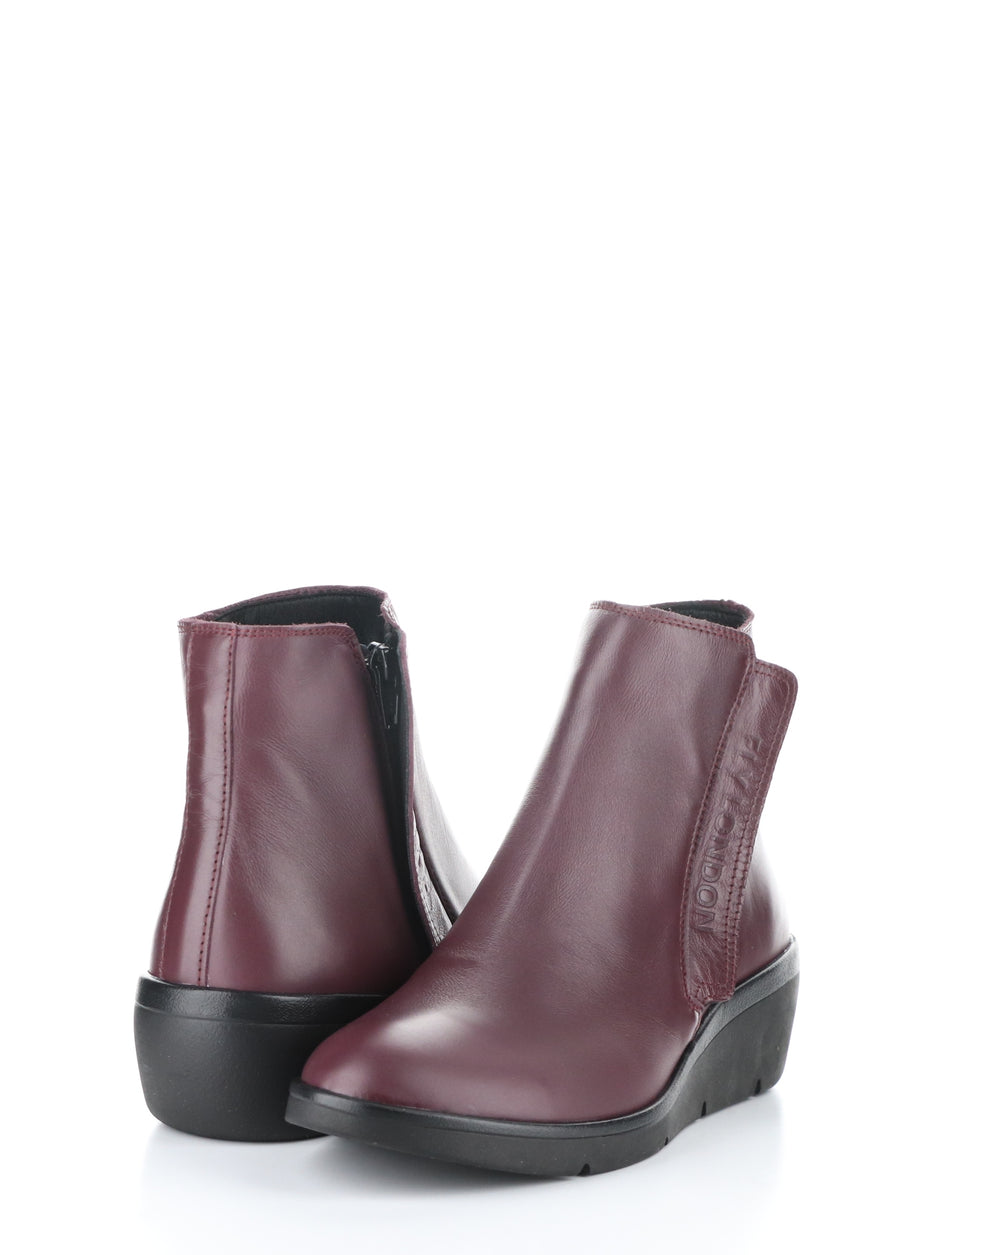 NULA550FLY 005 BORDEAUX Round Toe Boots